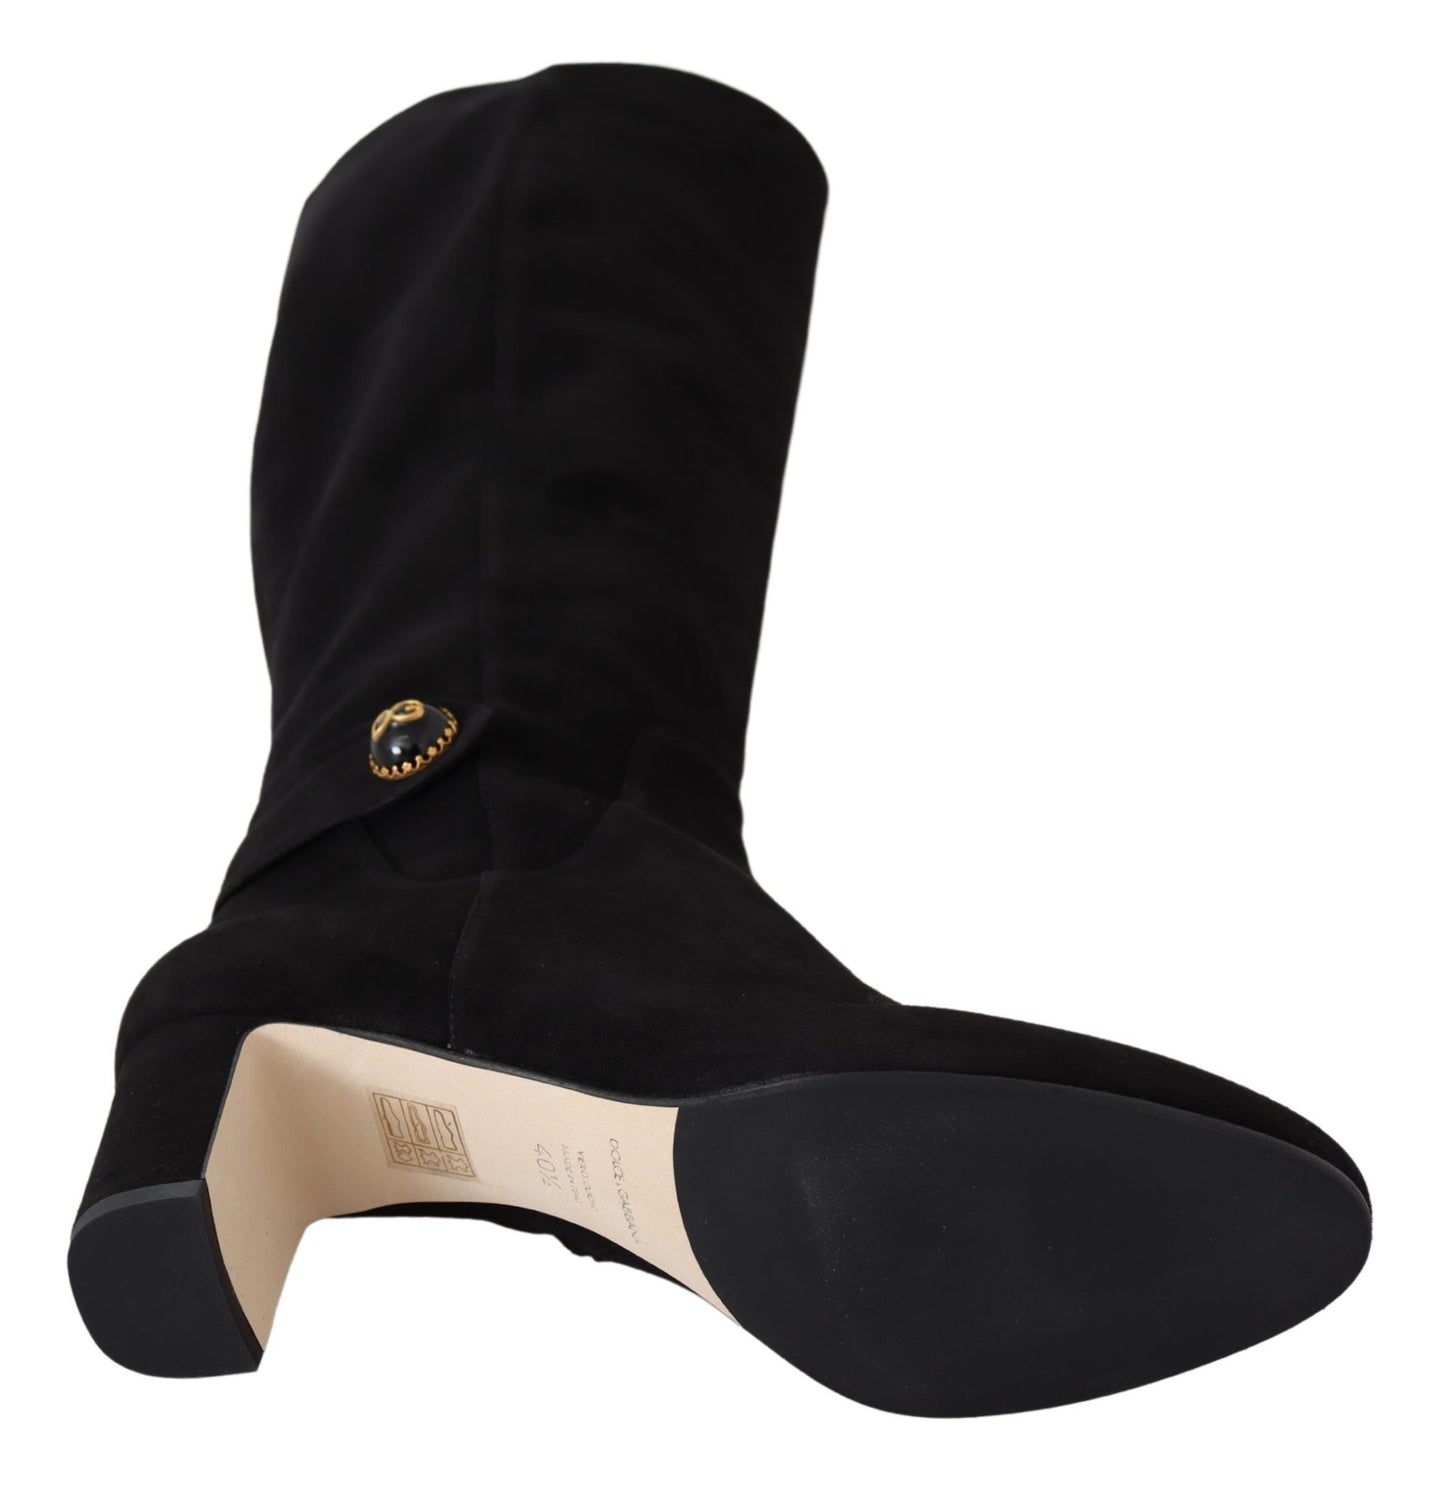 Black Leather Suede Vally Boots Shoes